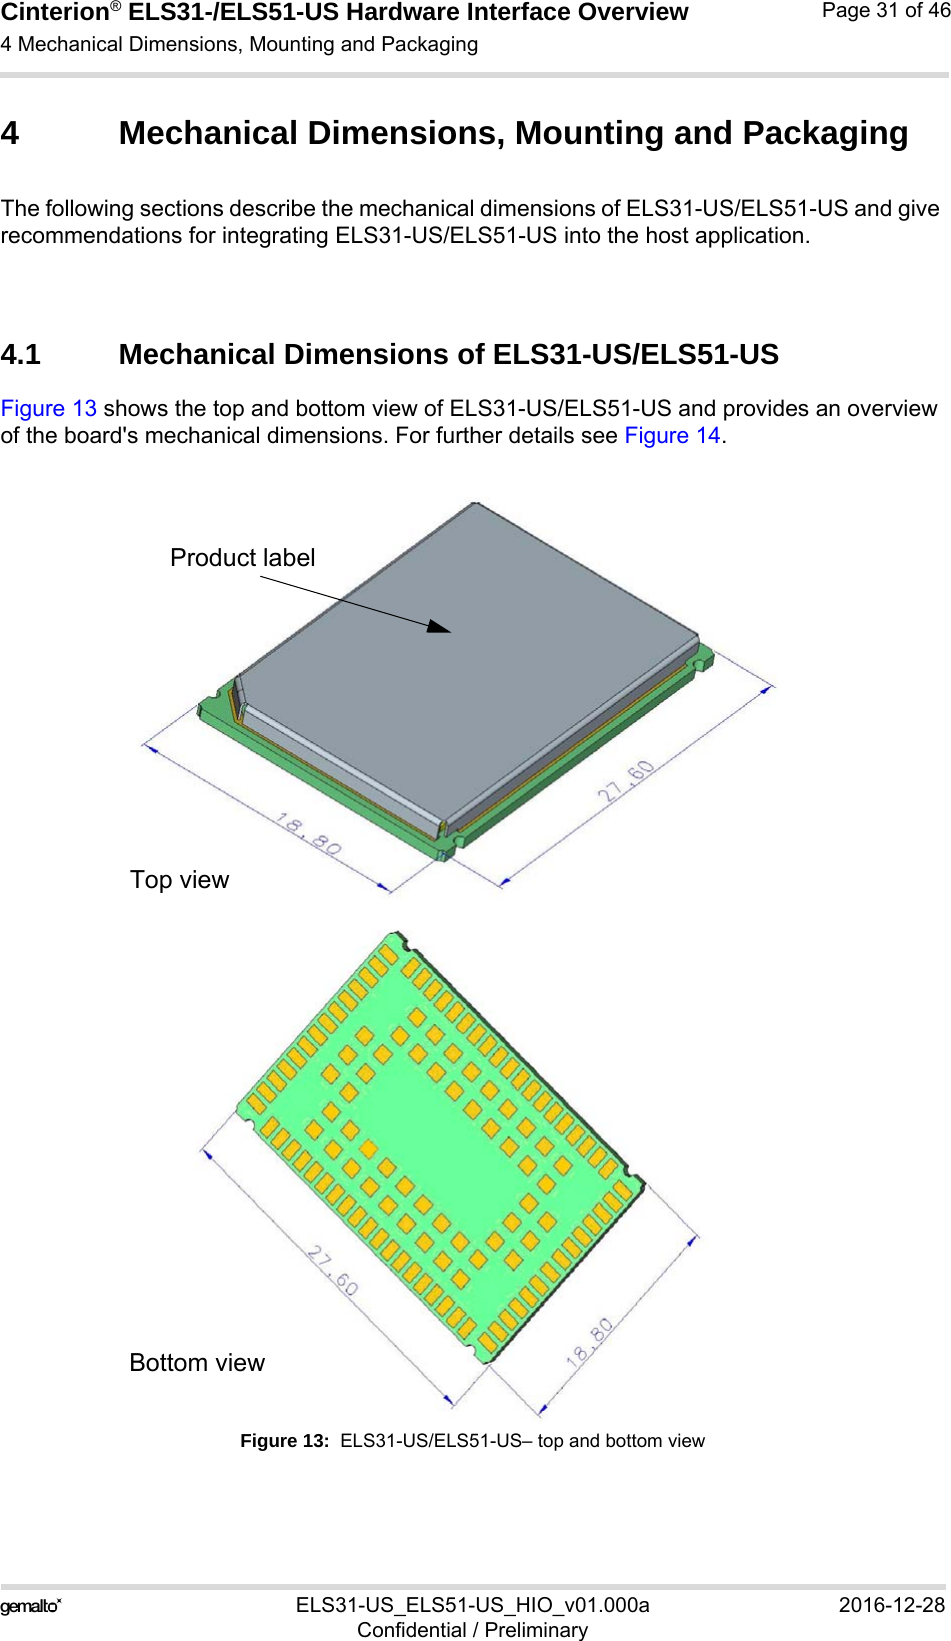 Cinterion® ELS31-/ELS51-US Hardware Interface Overview4 Mechanical Dimensions, Mounting and Packaging32ELS31-US_ELS51-US_HIO_v01.000a 2016-12-28Confidential / PreliminaryPage 31 of 464 Mechanical Dimensions, Mounting and PackagingThe following sections describe the mechanical dimensions of ELS31-US/ELS51-US and give recommendations for integrating ELS31-US/ELS51-US into the host application.4.1 Mechanical Dimensions of ELS31-US/ELS51-US Figure 13 shows the top and bottom view of ELS31-US/ELS51-US and provides an overview of the board&apos;s mechanical dimensions. For further details see Figure 14. Figure 13:  ELS31-US/ELS51-US– top and bottom viewProduct labelTop viewBottom view